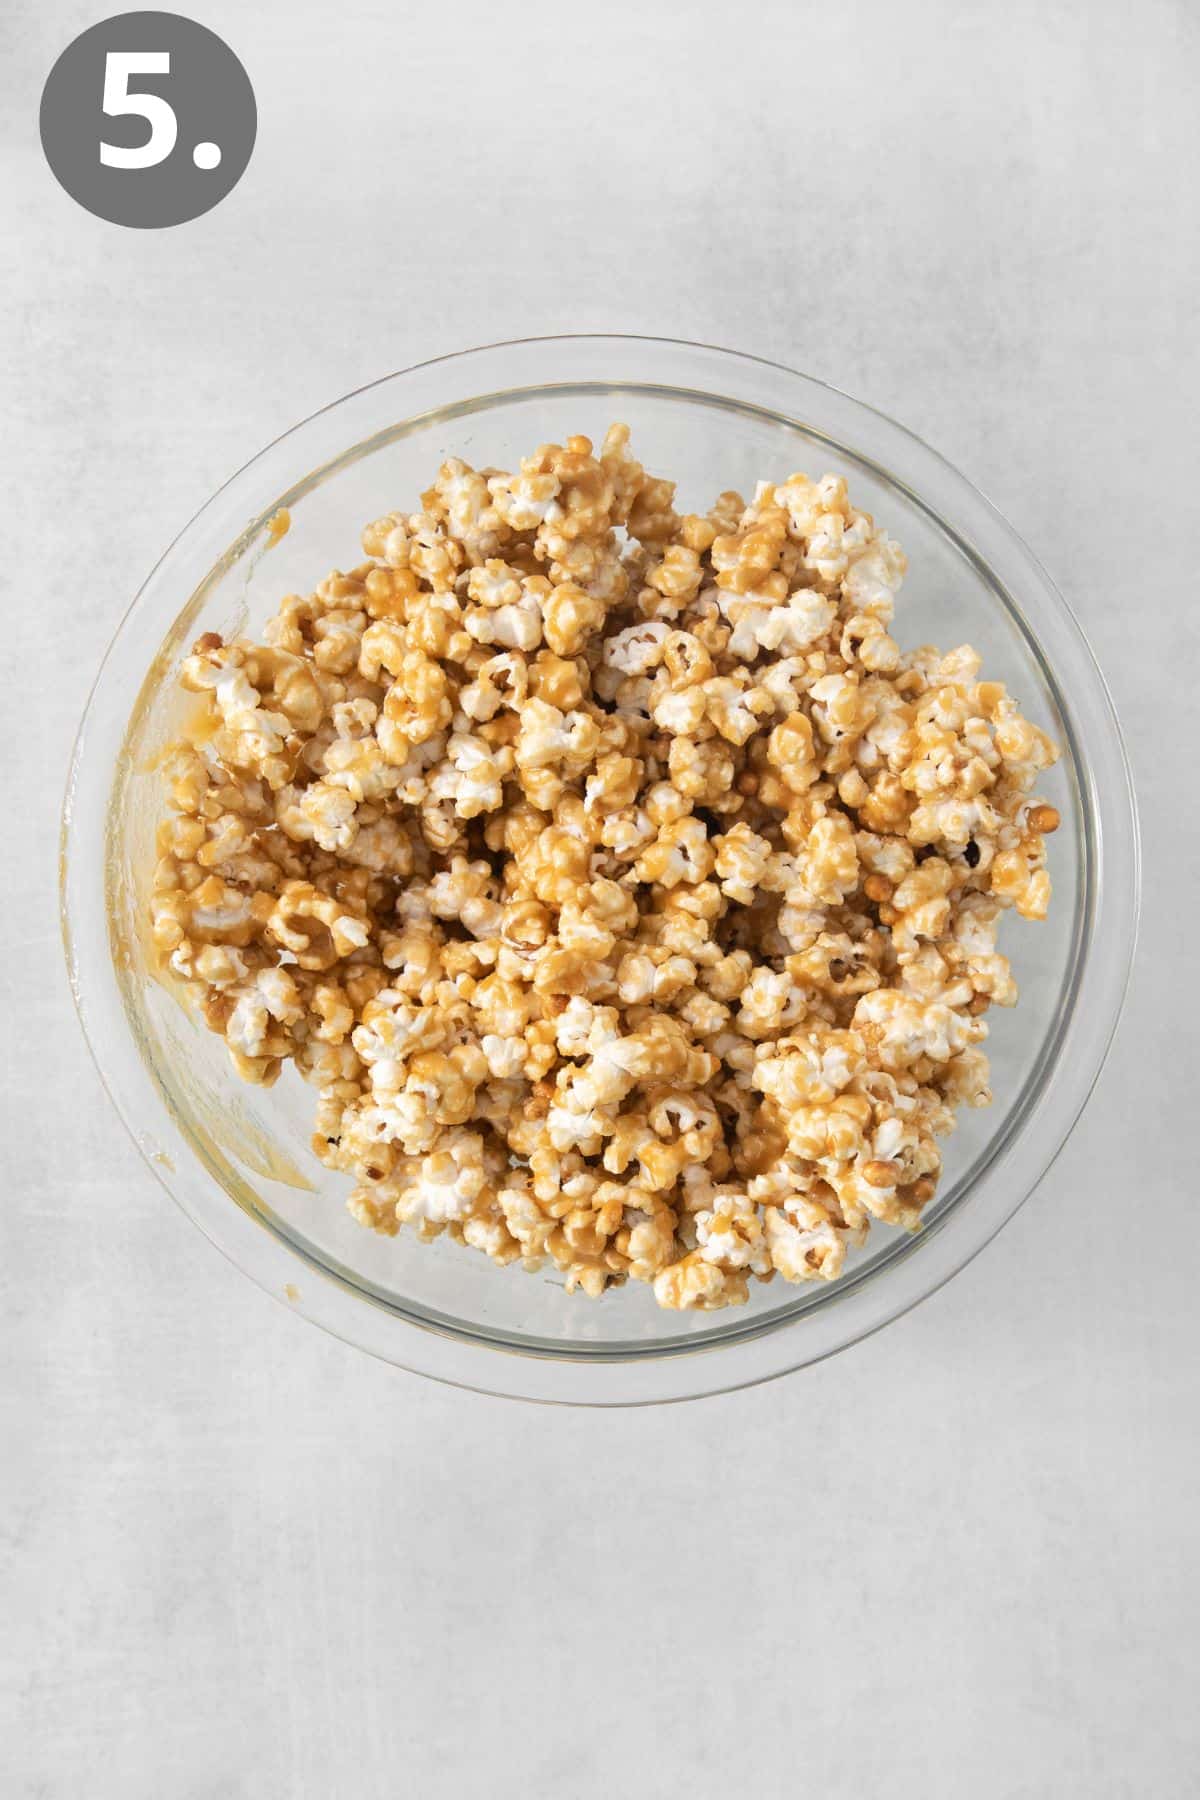 Microwave caramel corn in a bowl on a countertop